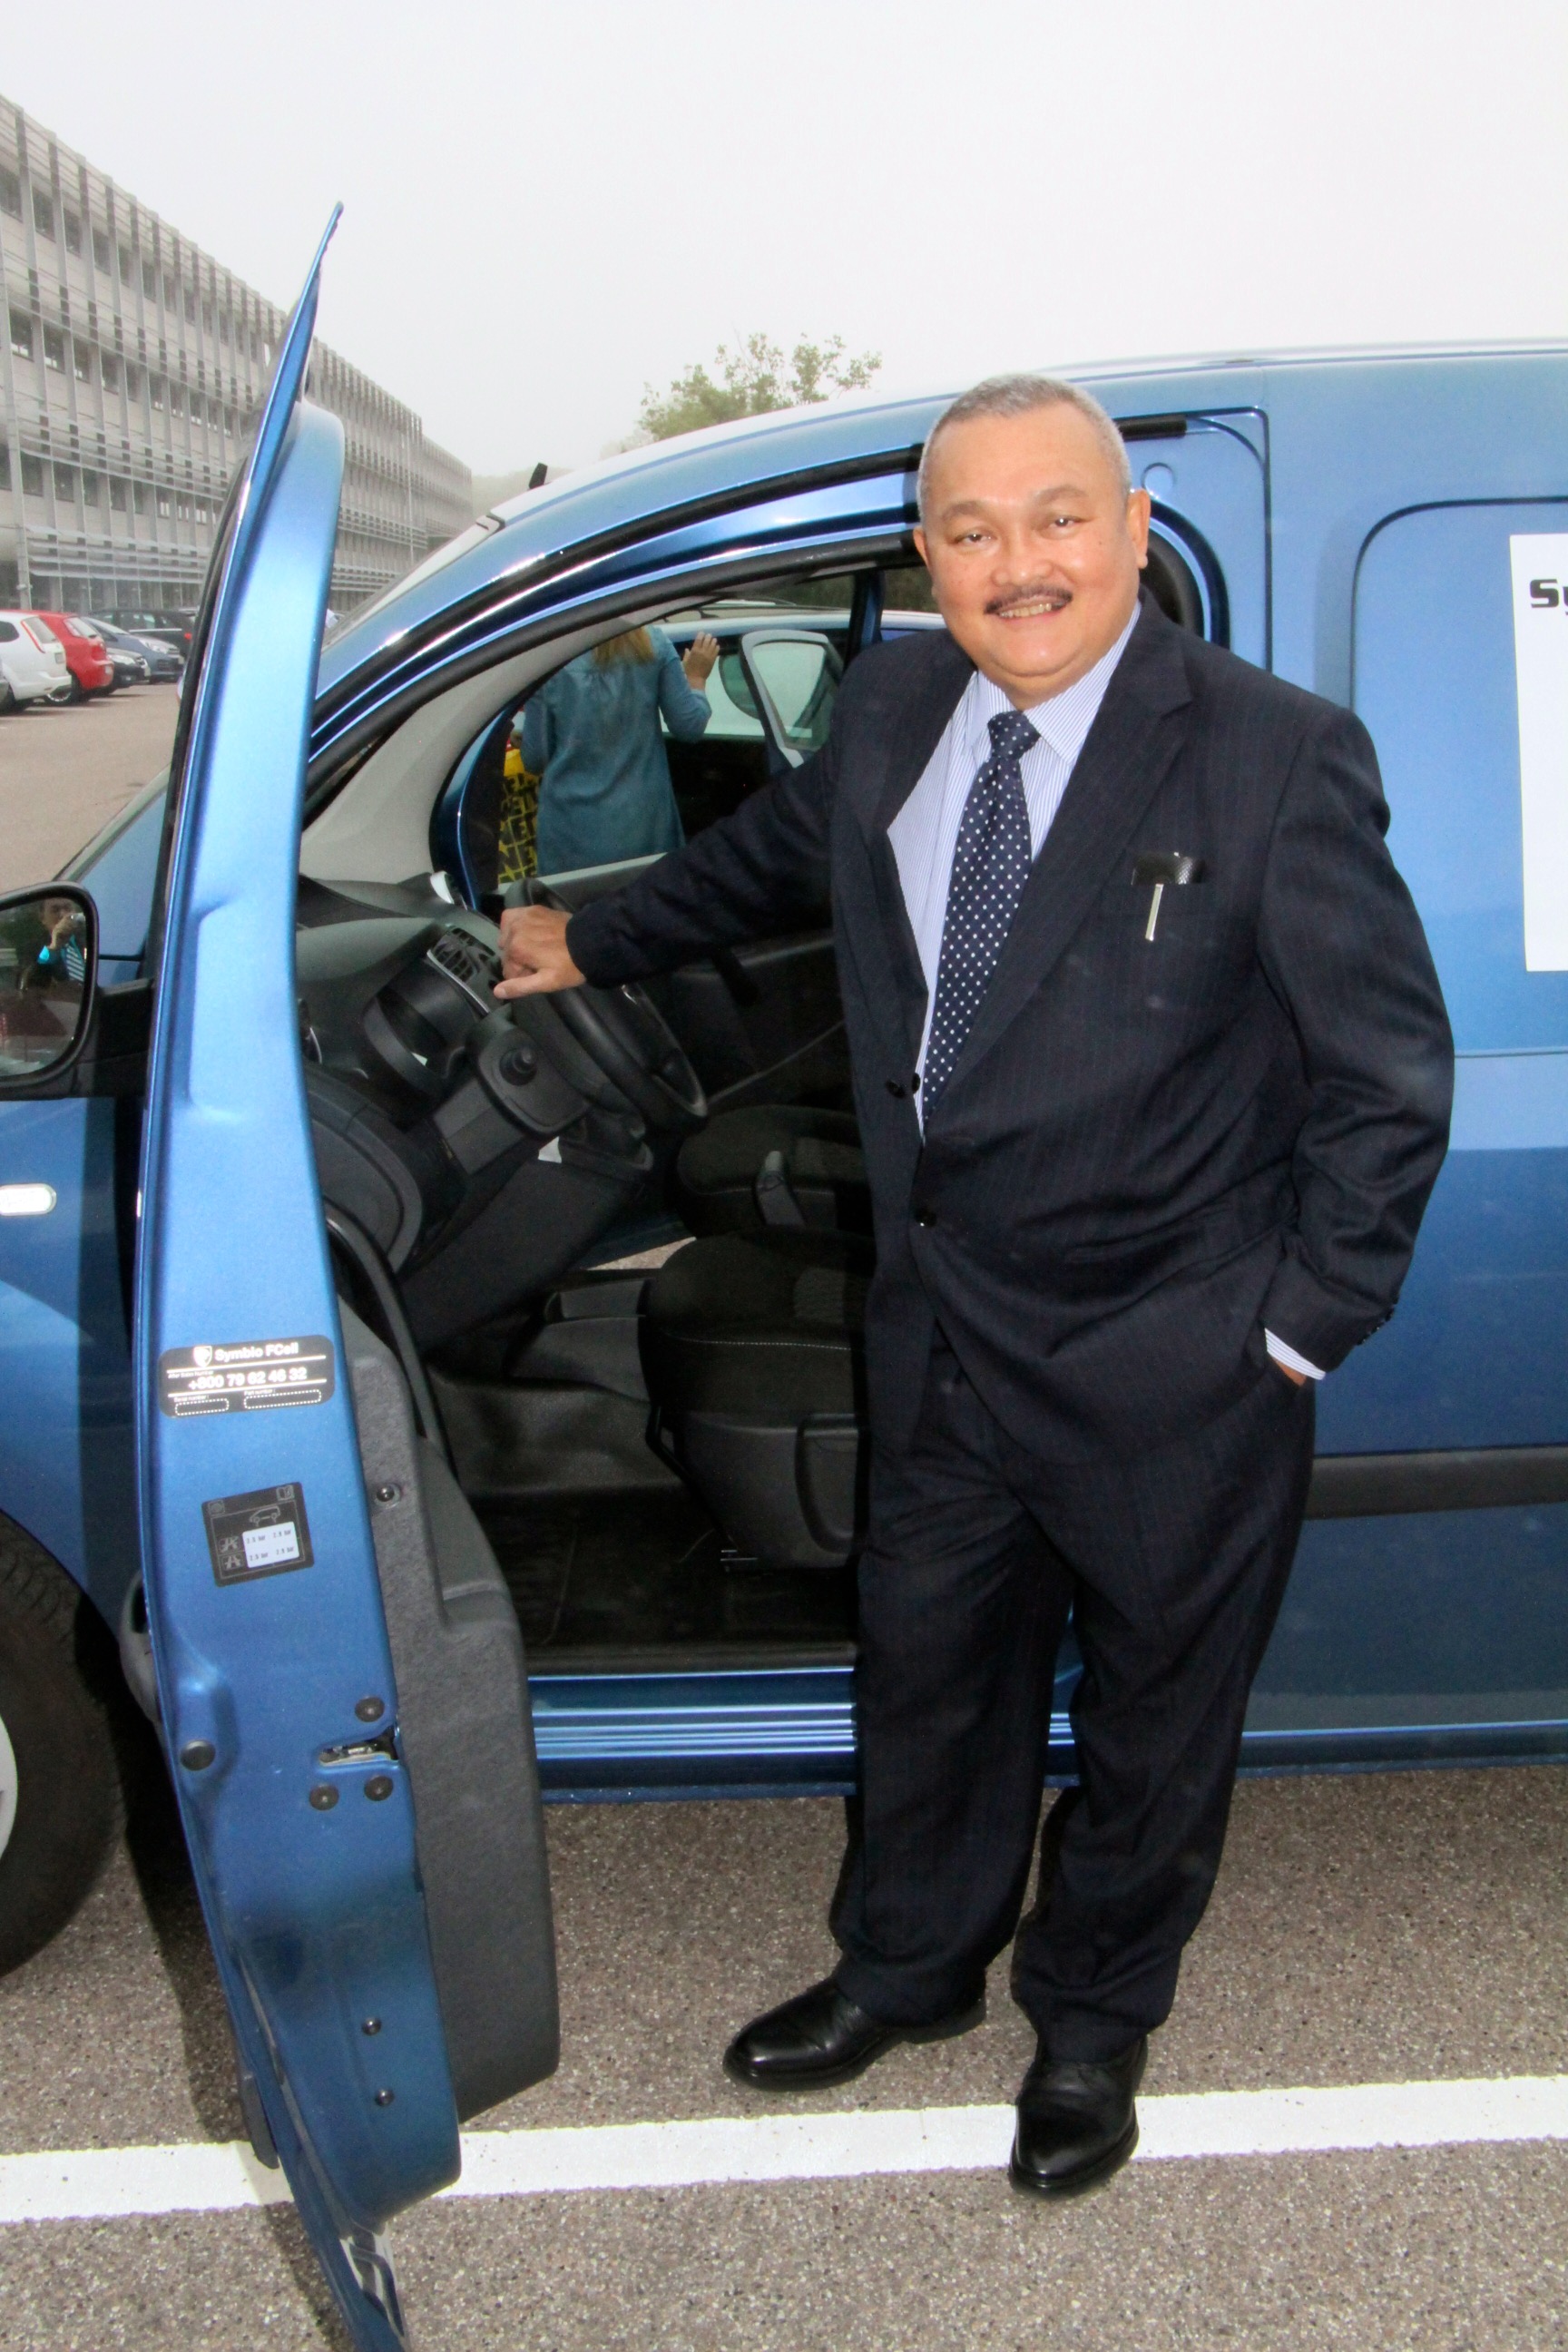 Governor of Sumatra with hydrogen fuel cell vehicle in Denmark